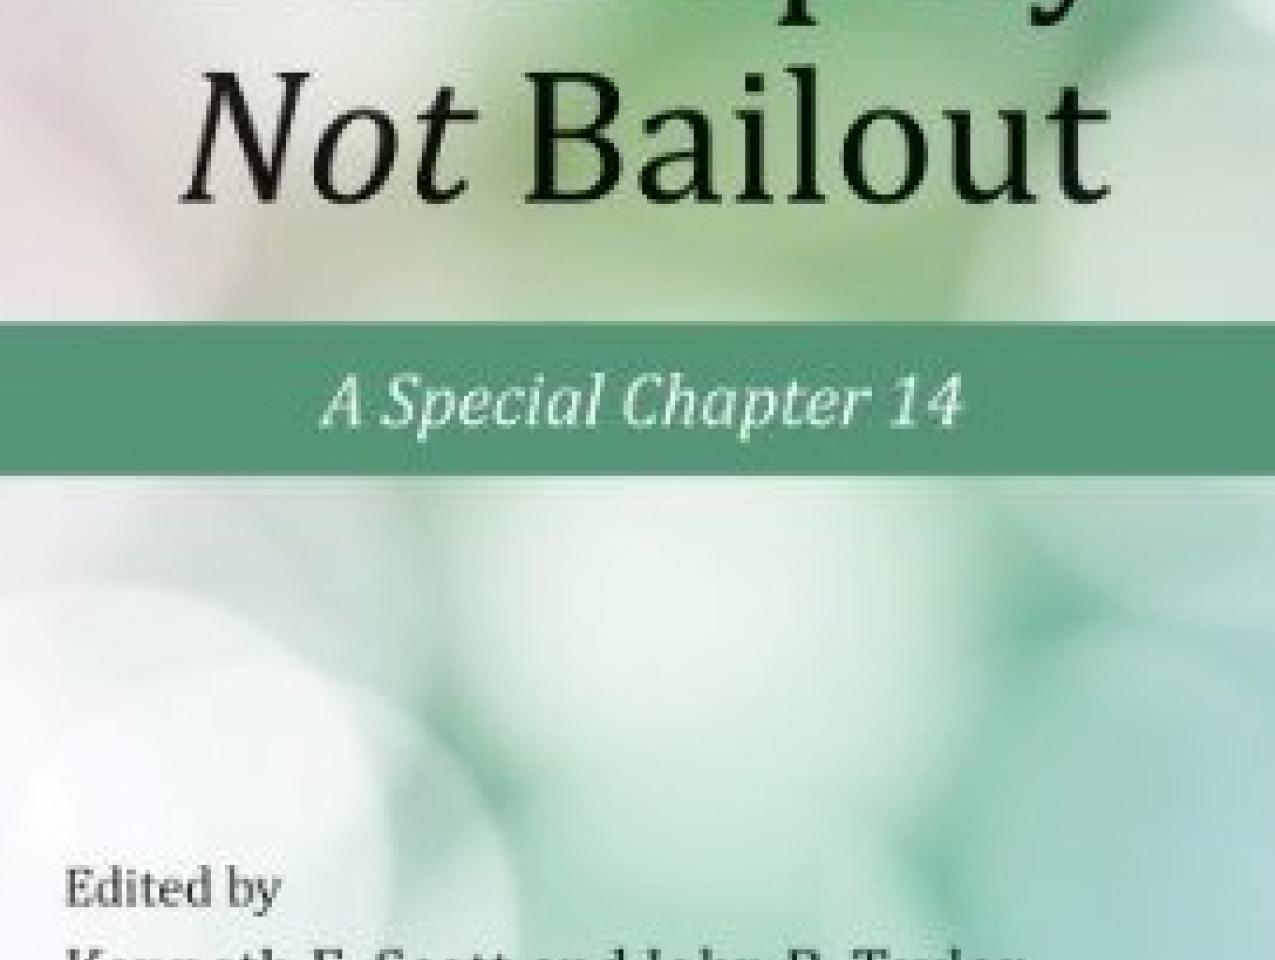 Bankruptcy Not Bailout: A Special Chapter 14